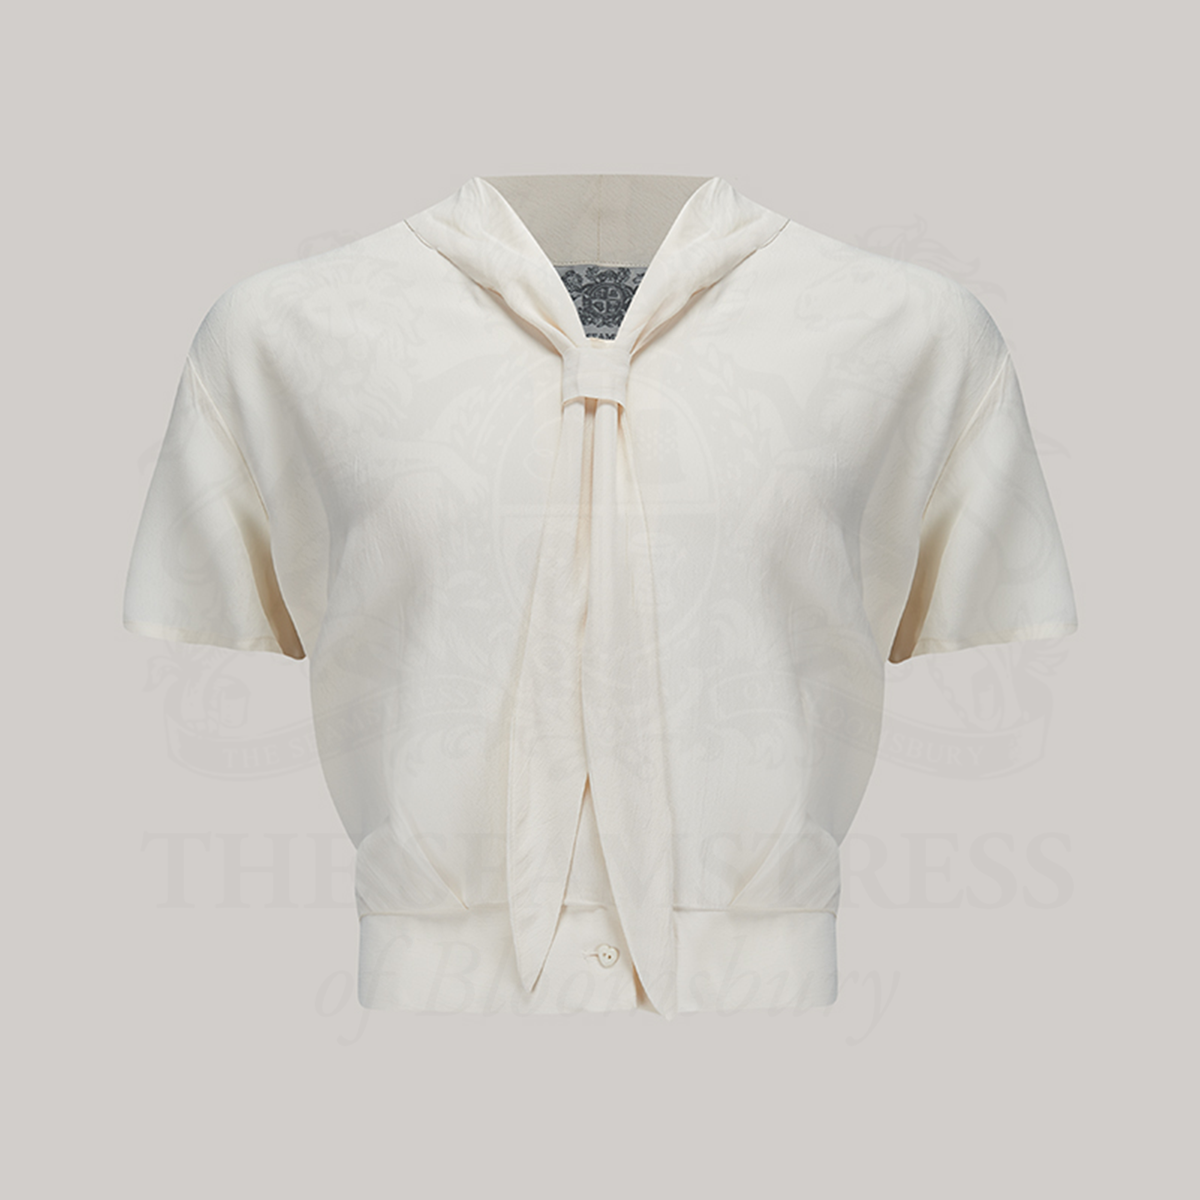 A 1940s sailor style blouse with short sleeves in cream. Featuring a roll style collar to give the iconic sailor look. Small buttons run down the front of the blouse for fastening but are hidden by the long collar.